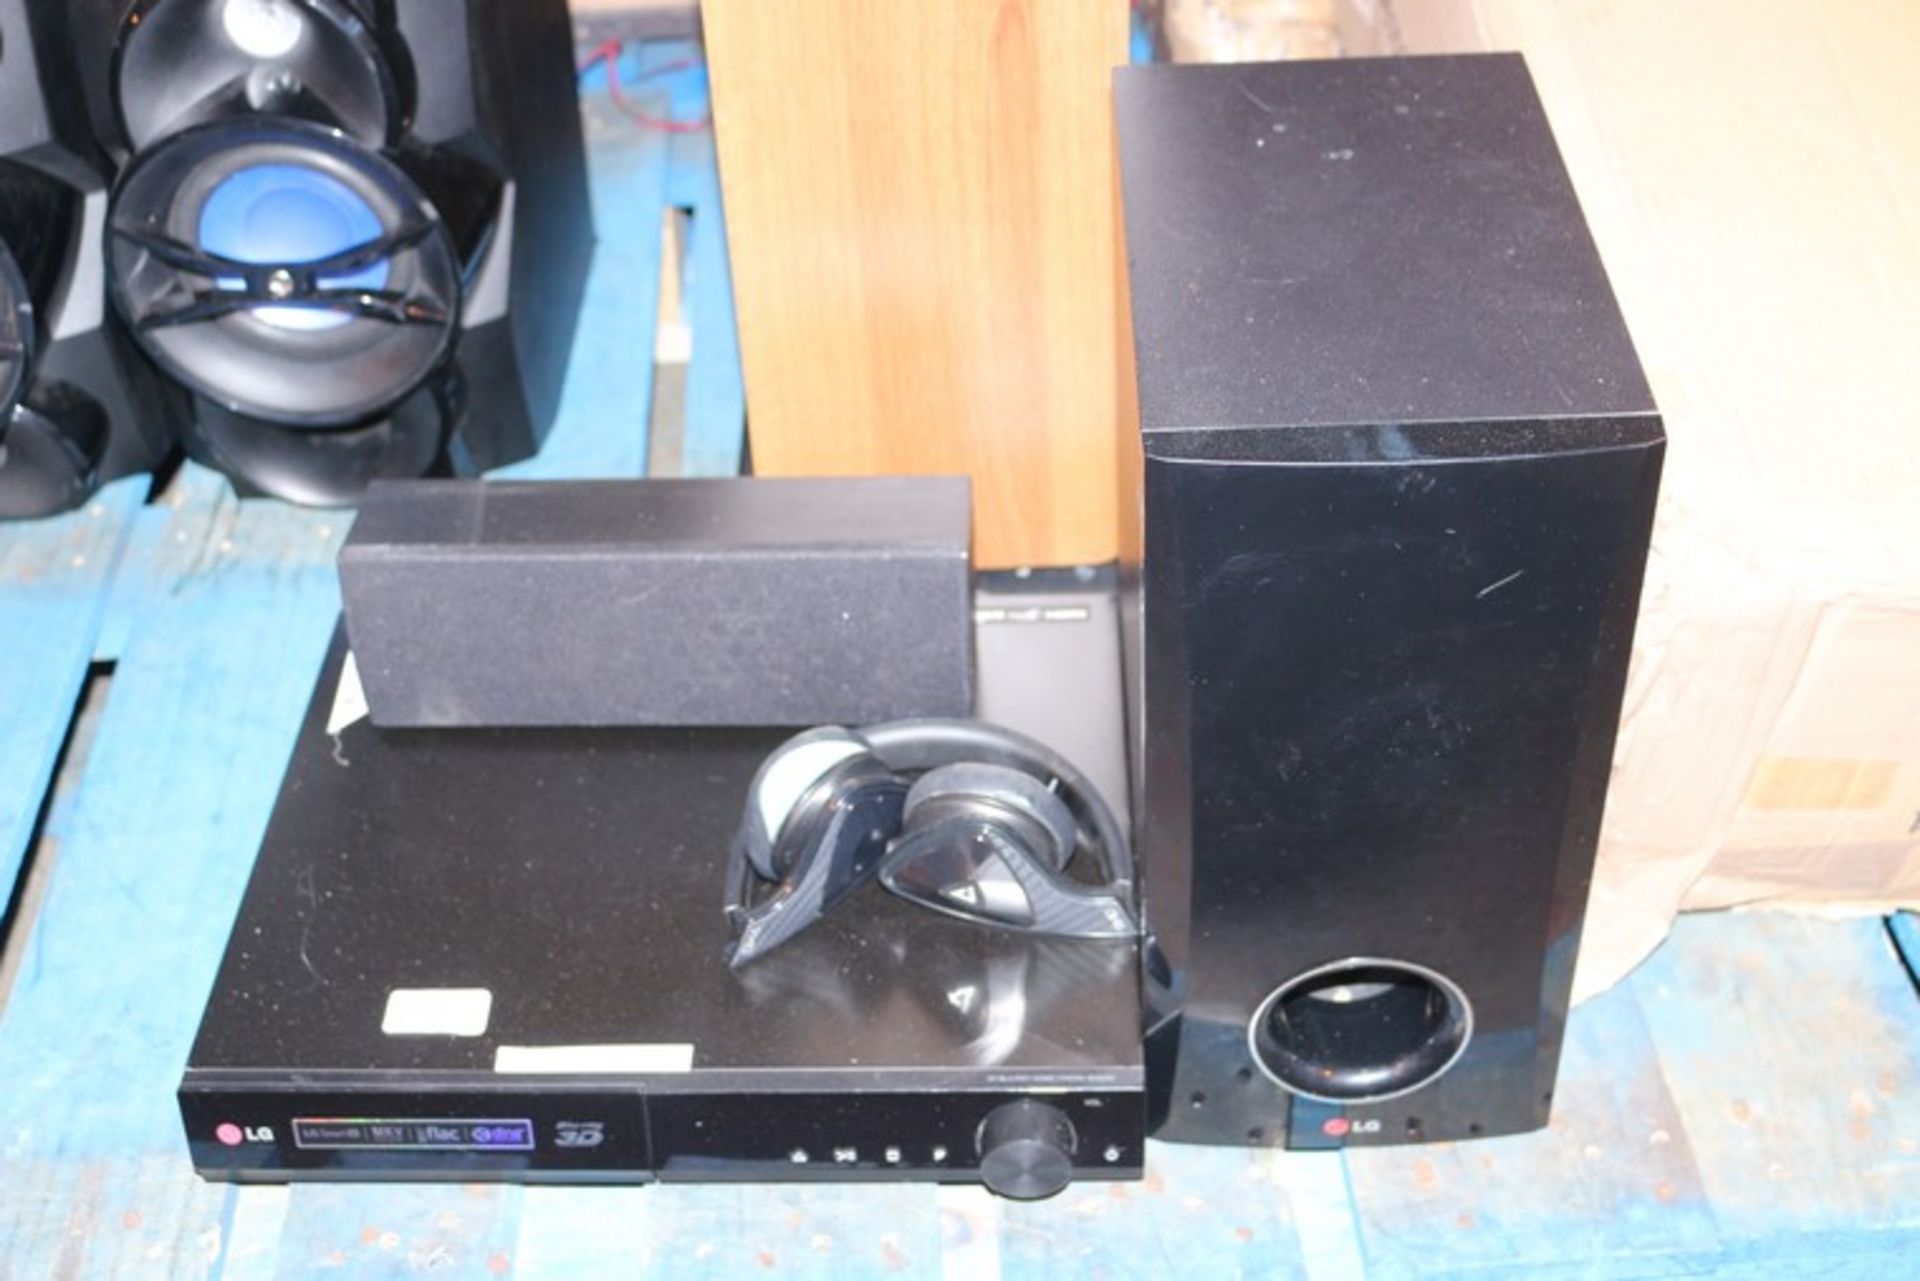 1 x LG 3D BLURAY DISK PLAYER WITH SUBWOOFER (27.1.17) *PLEASE NOTE THAT THE BID PRICE IS